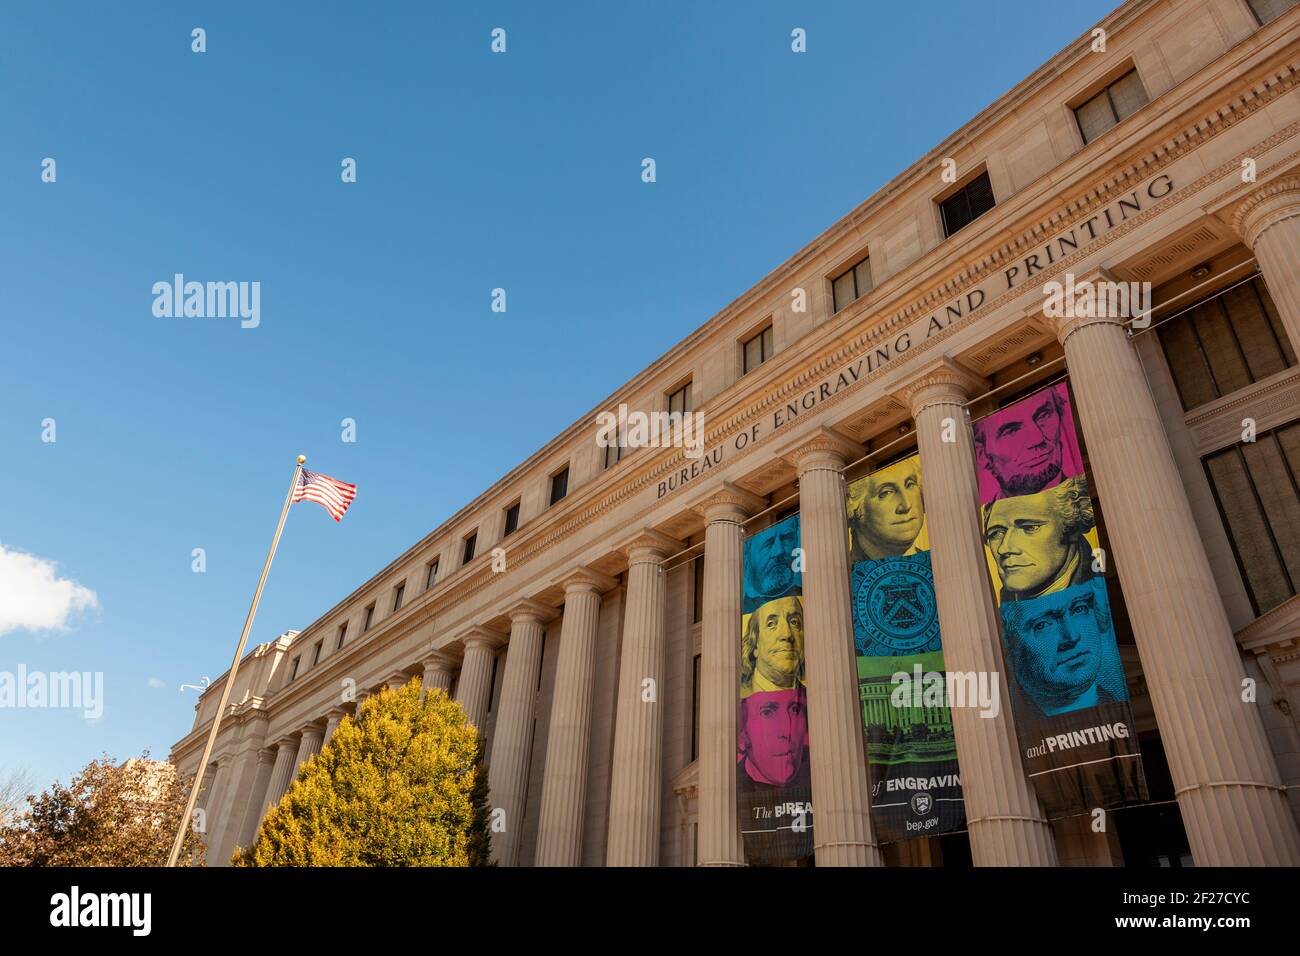 Washington D.C. USA 11-02-2020: Image showing the exterior of the Bureau of Engraving and Printing, a federal building under the Department of Treasur Stock Photo